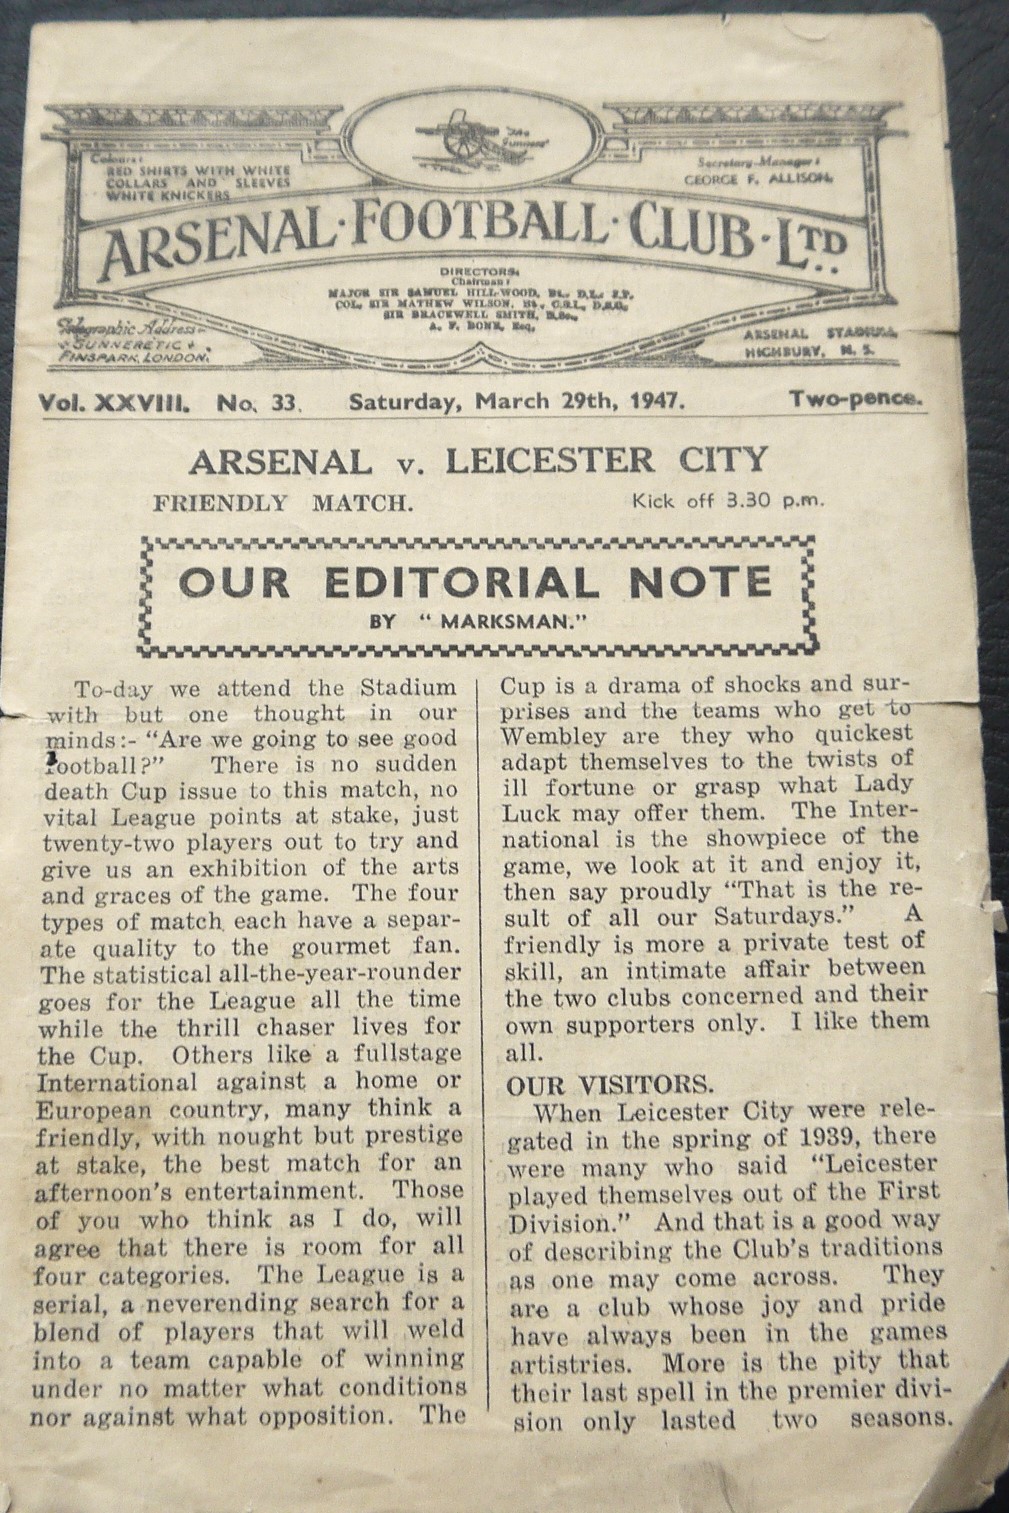 1946-47 ARSENAL V LEICESTER CITY FRIENDLY